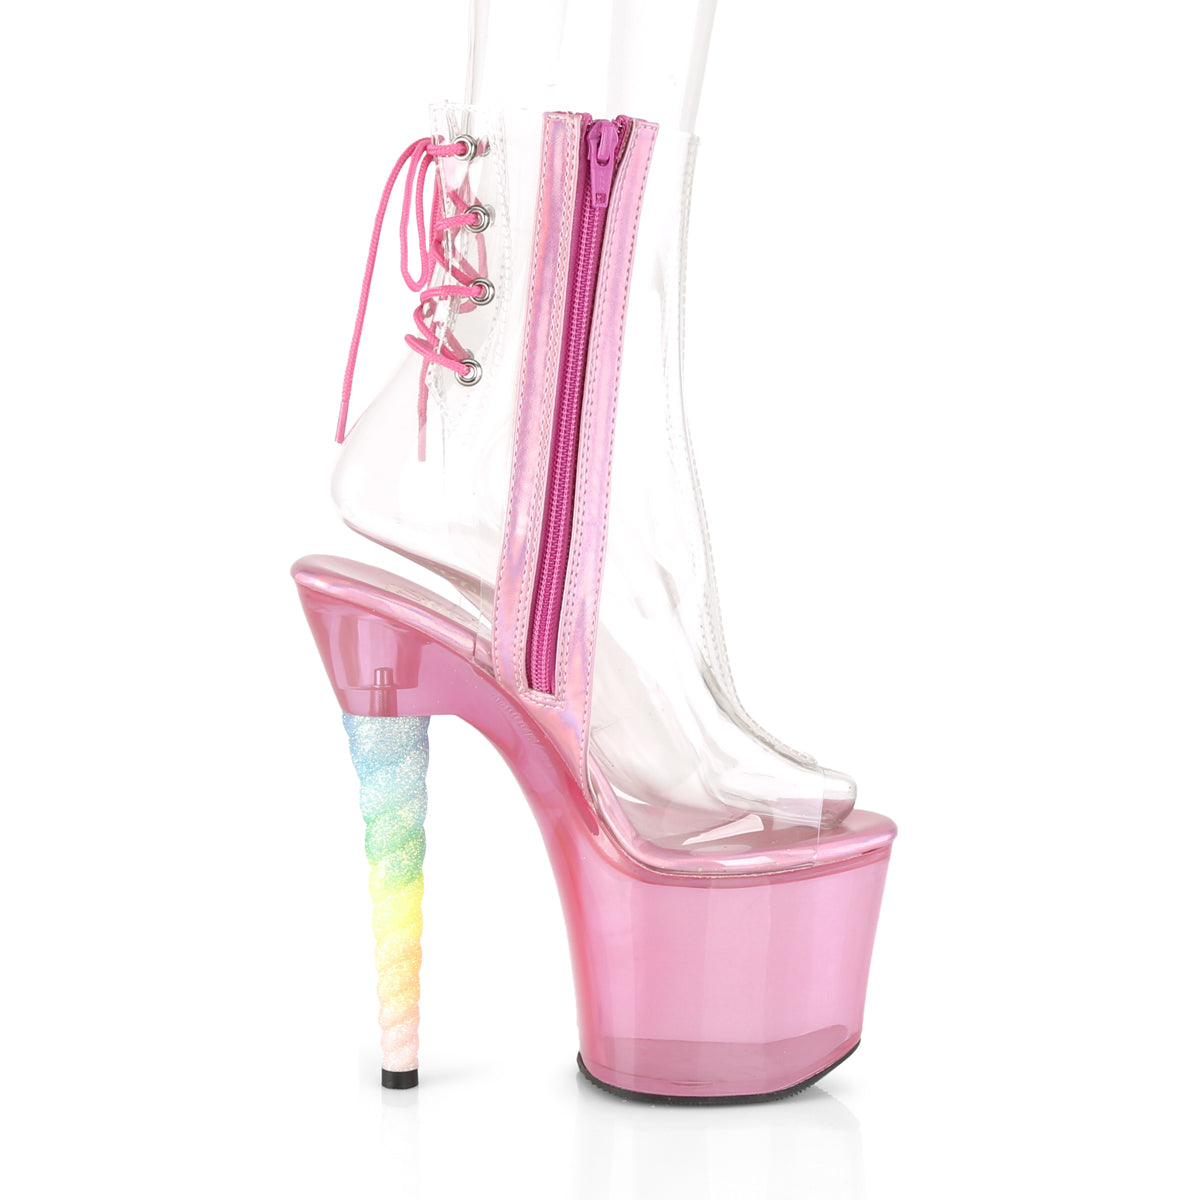 UNICORN-1018C Clear/Bubble Gum Pink Tinted Ankle Boot Pleaser